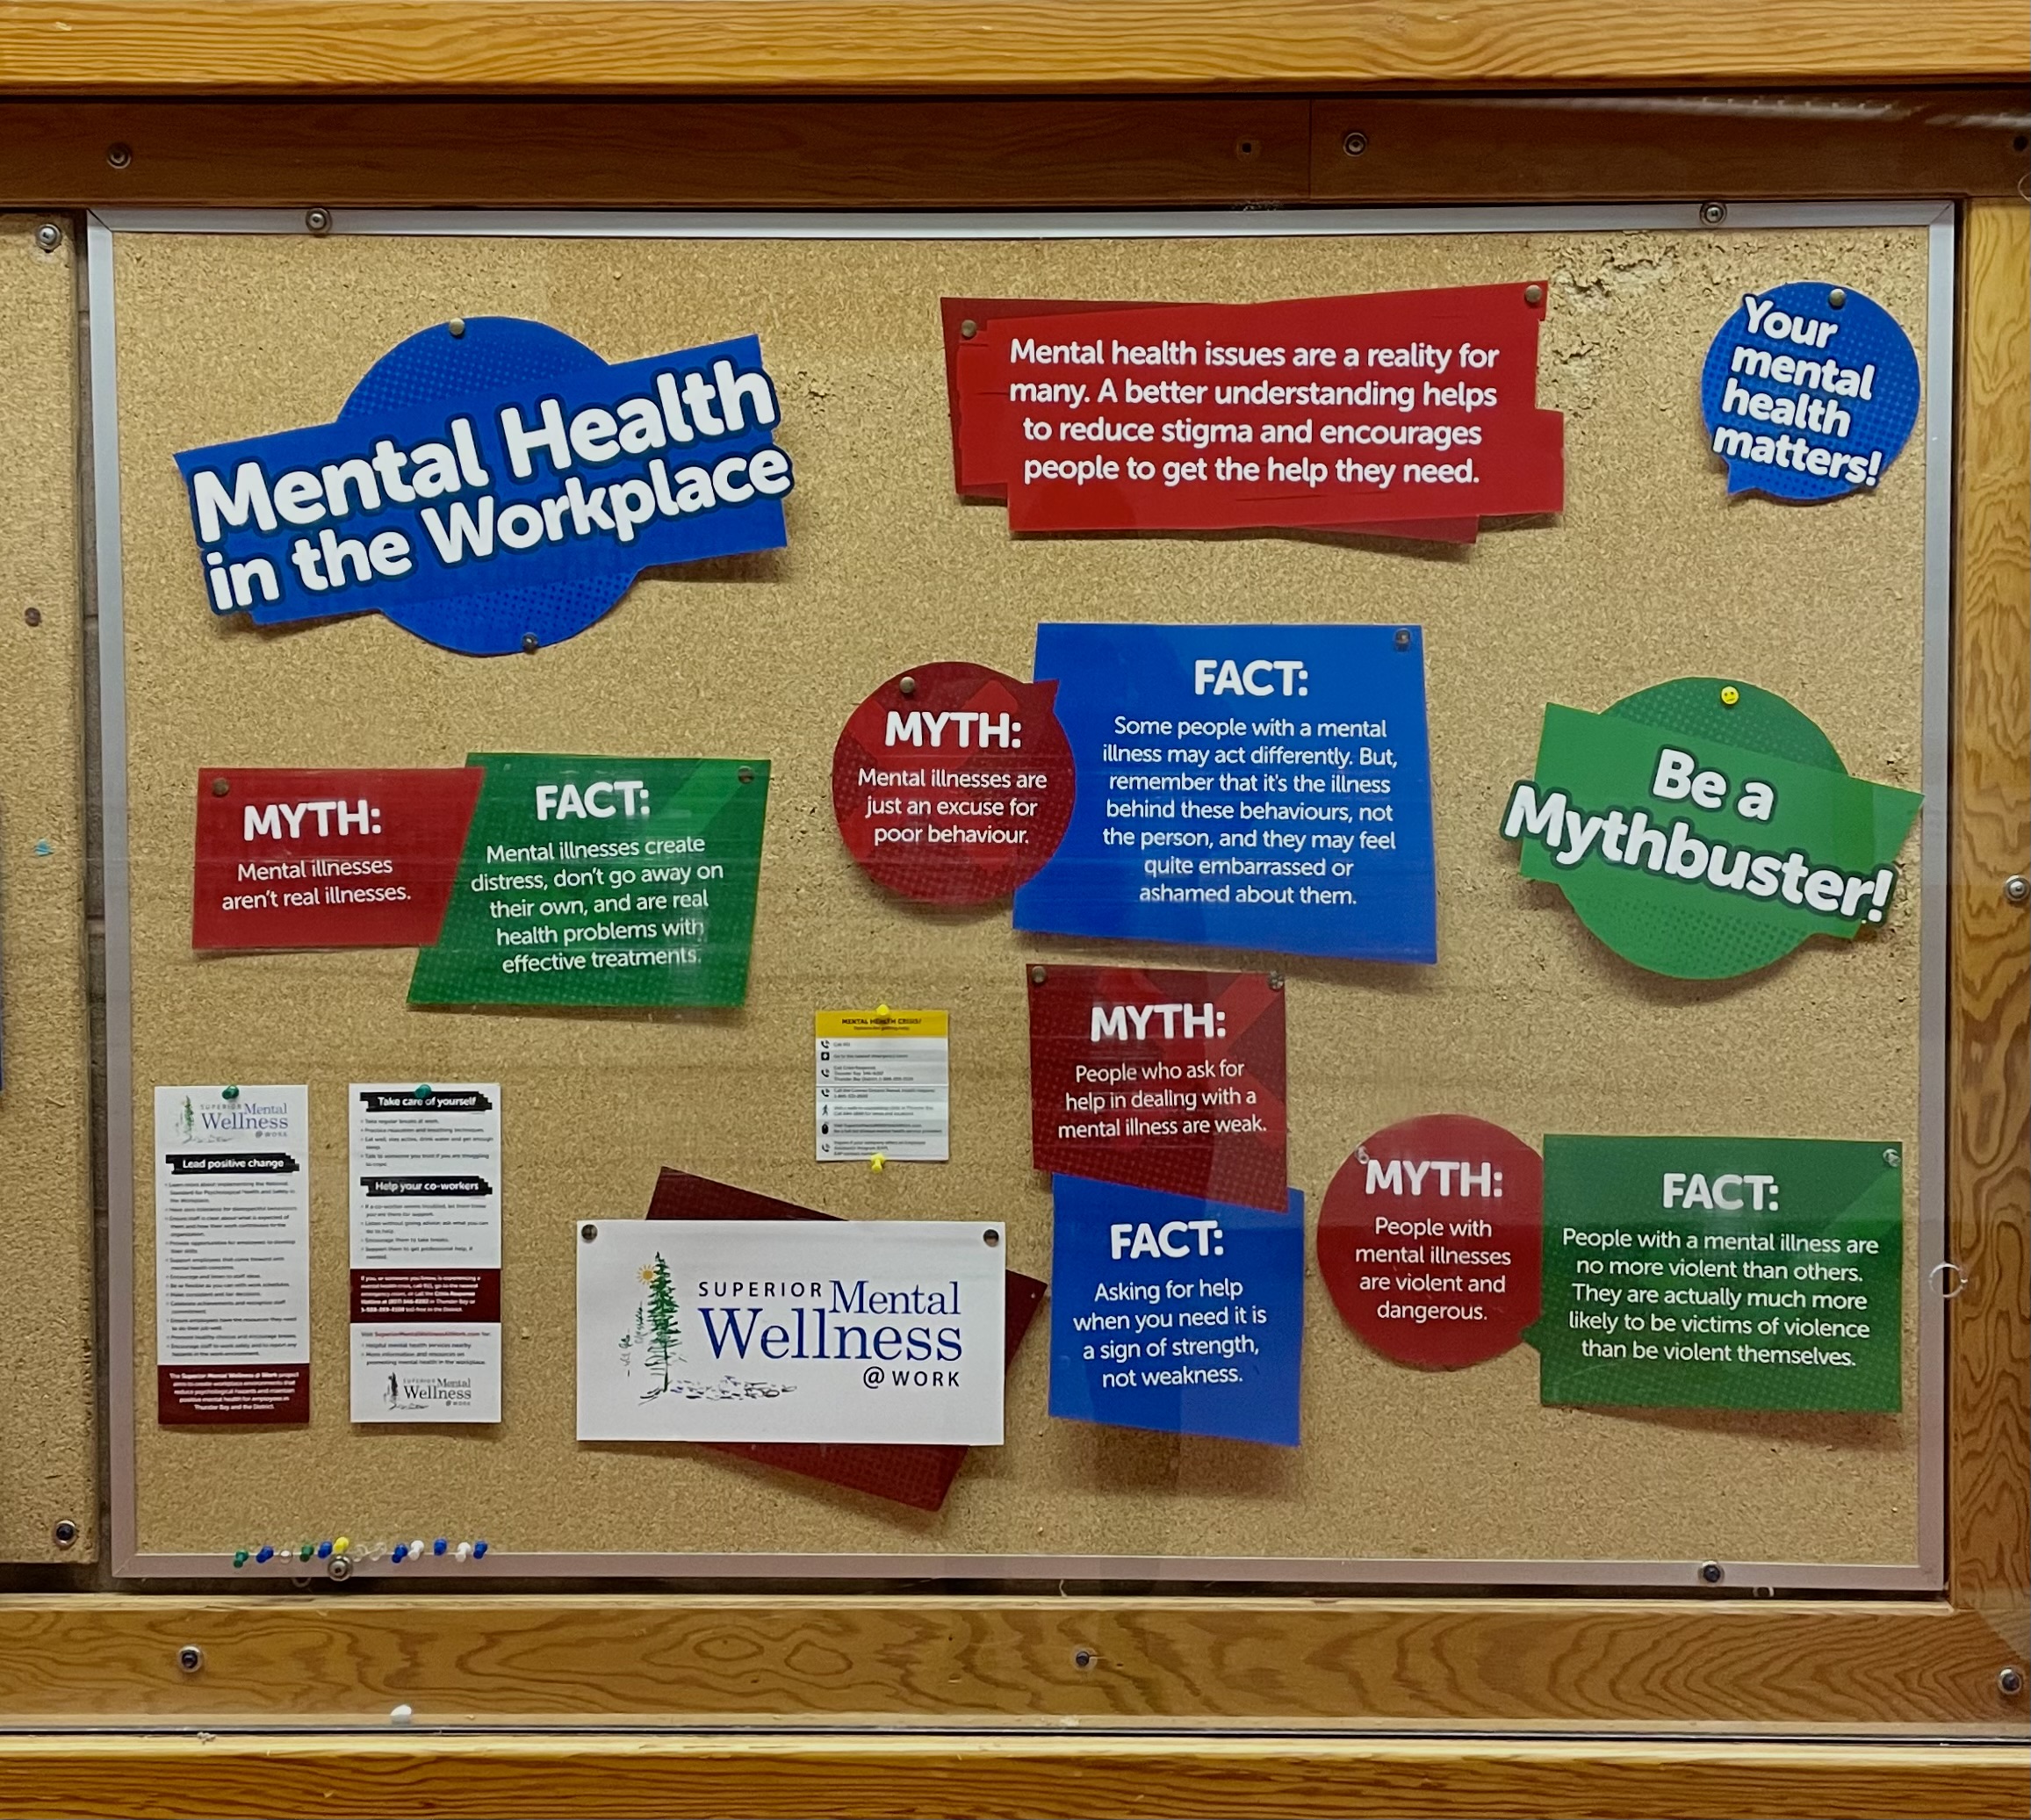 Make sure to visit our Wellness at Work board across from the Human Resources Department in the basement of the Agora